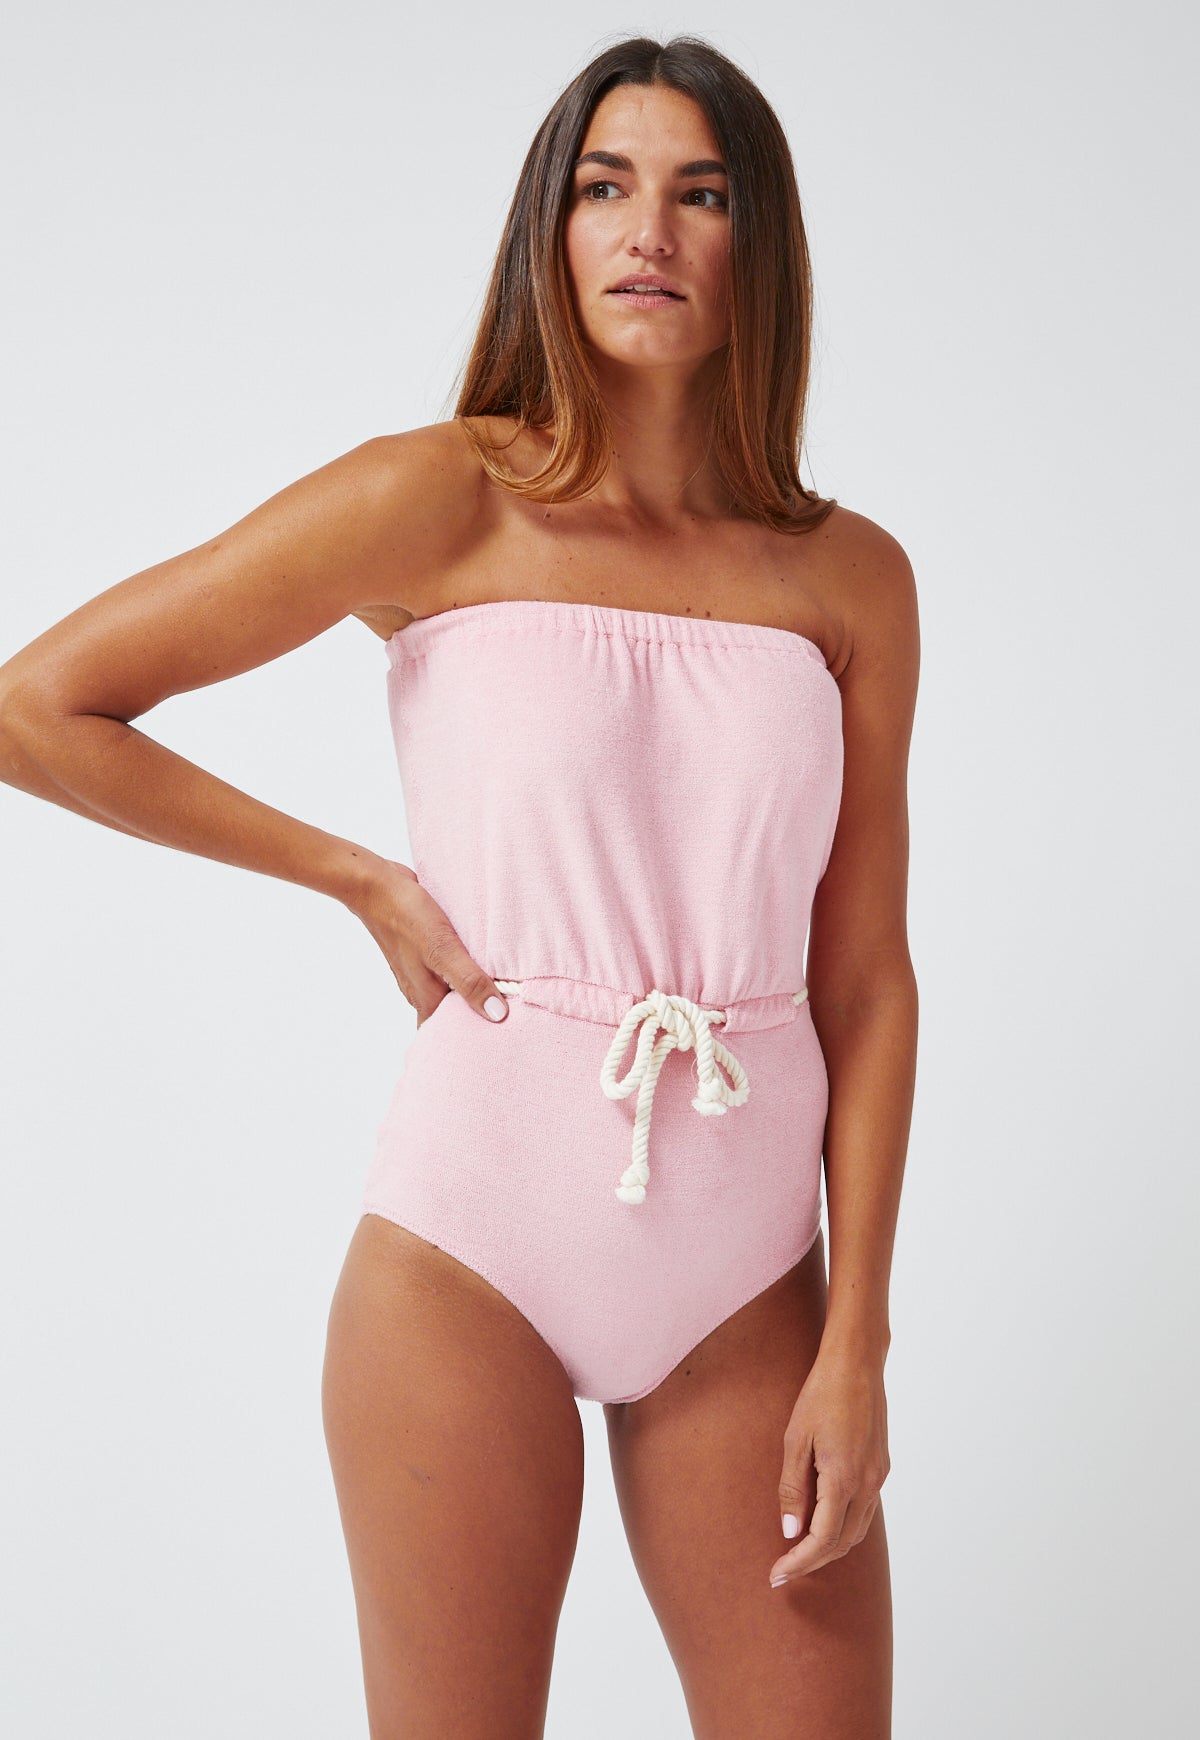 THE VICTOR DRAWSTRING MAILLOT in PINK TERRY CLOTH